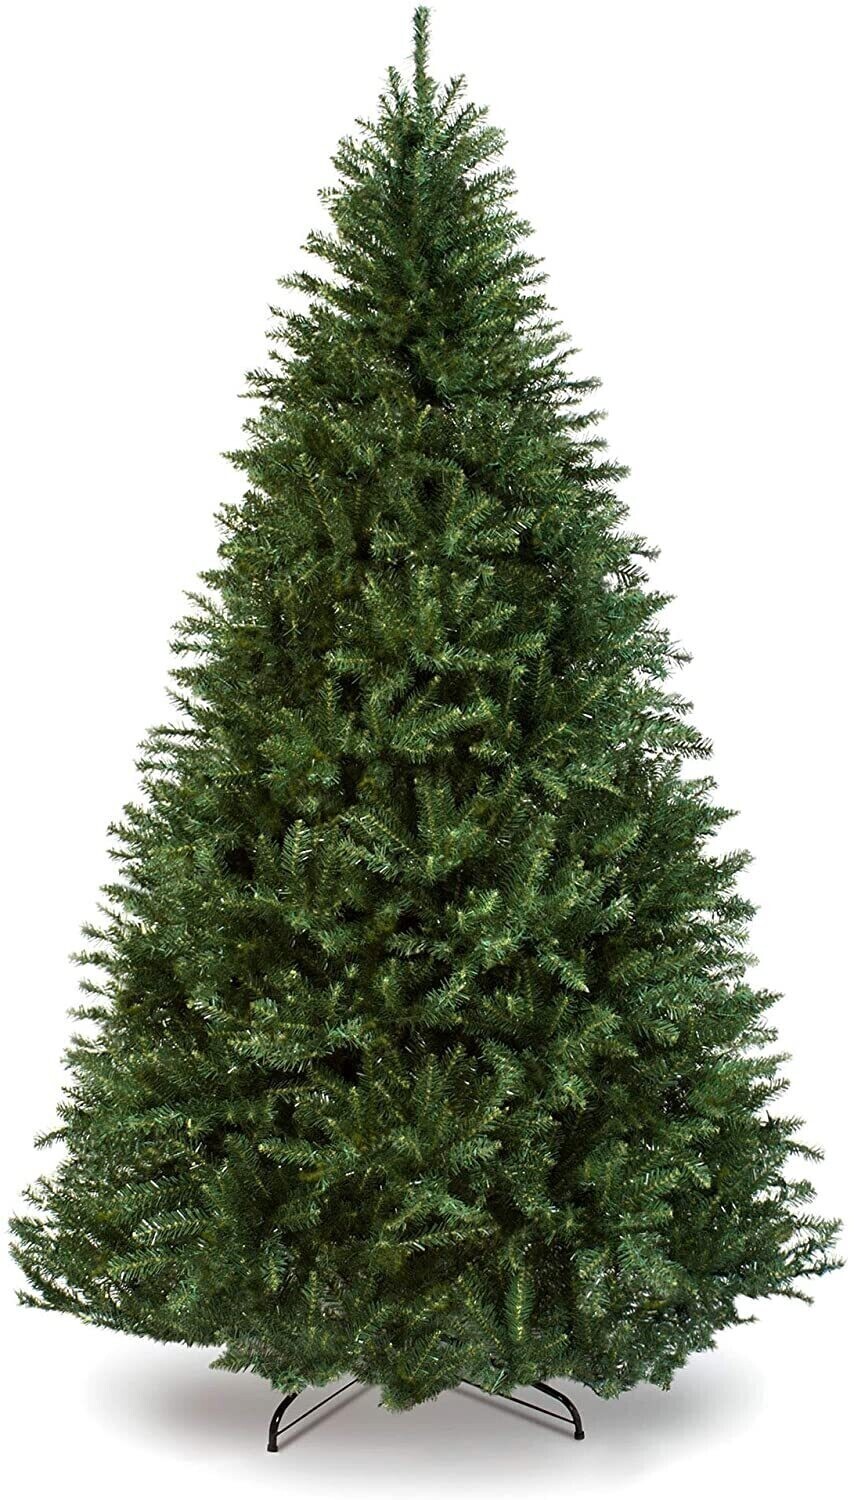 Christmas Tree Green 90cm - Festive Charm for Your Home